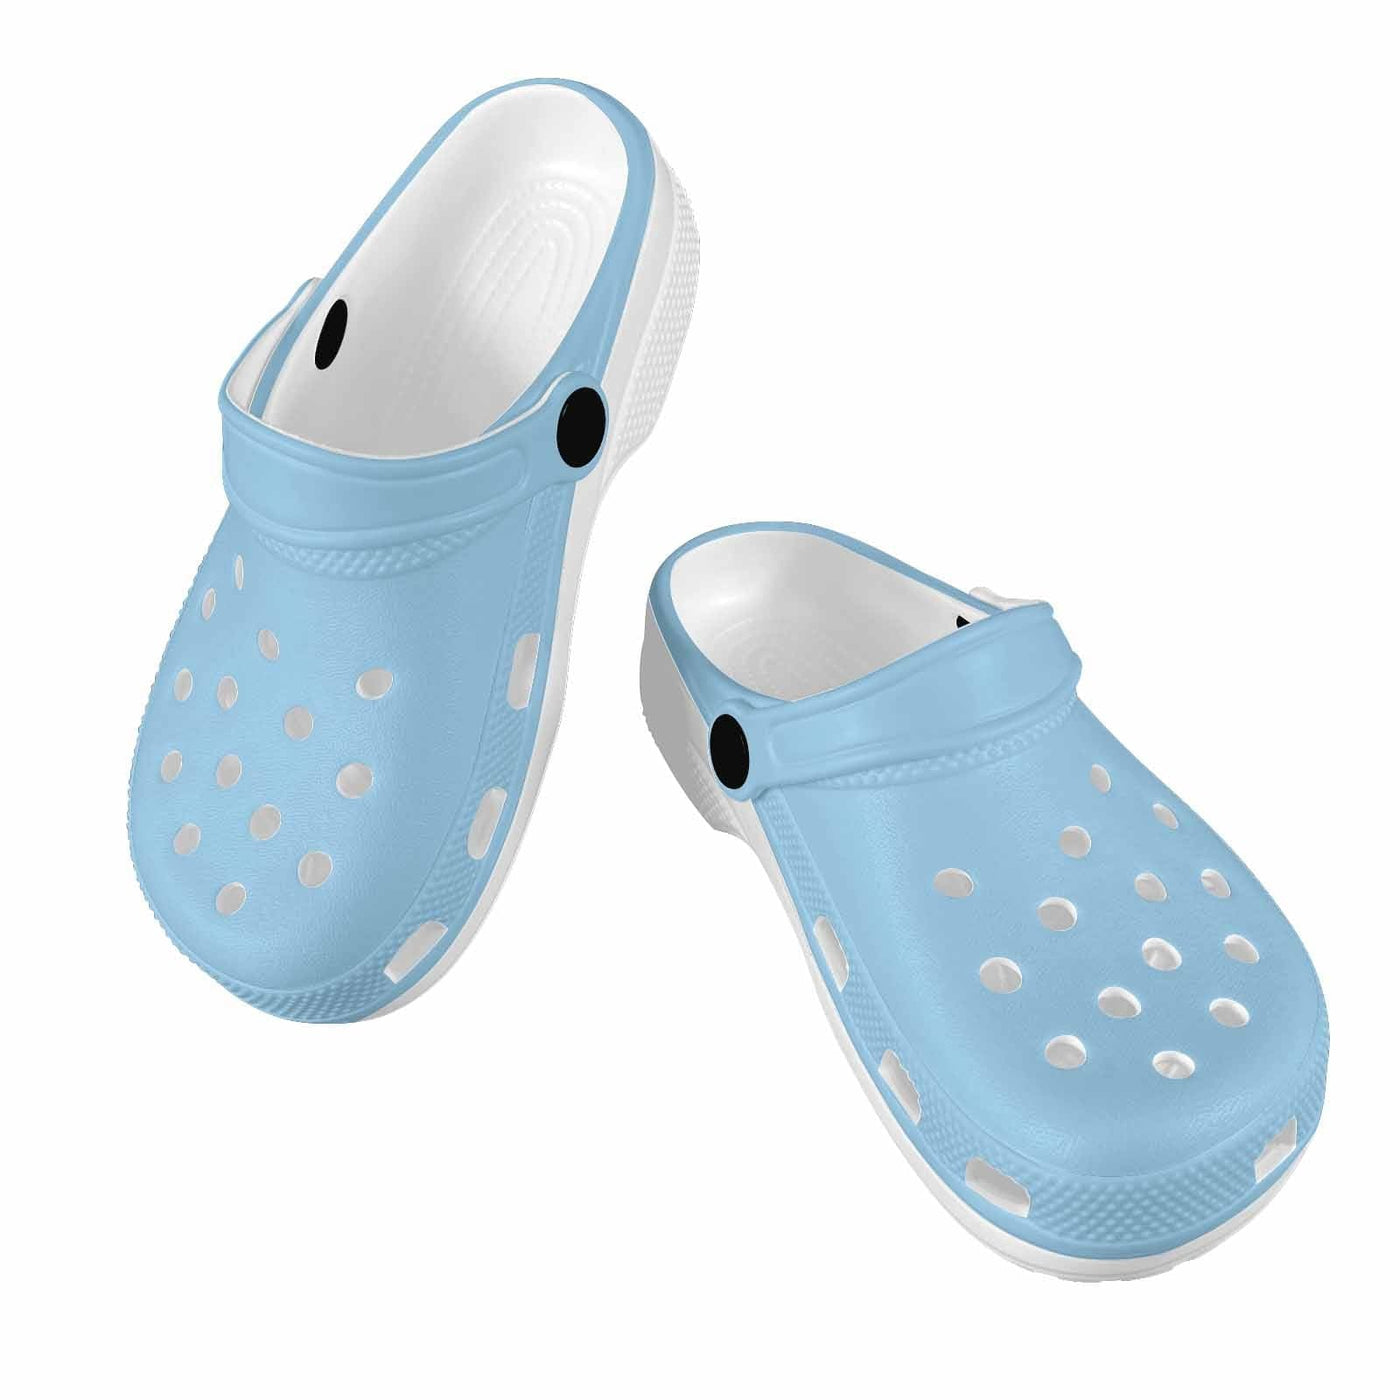 Cornflower Blue Clogs For Youth - Unisex | Clogs | Youth